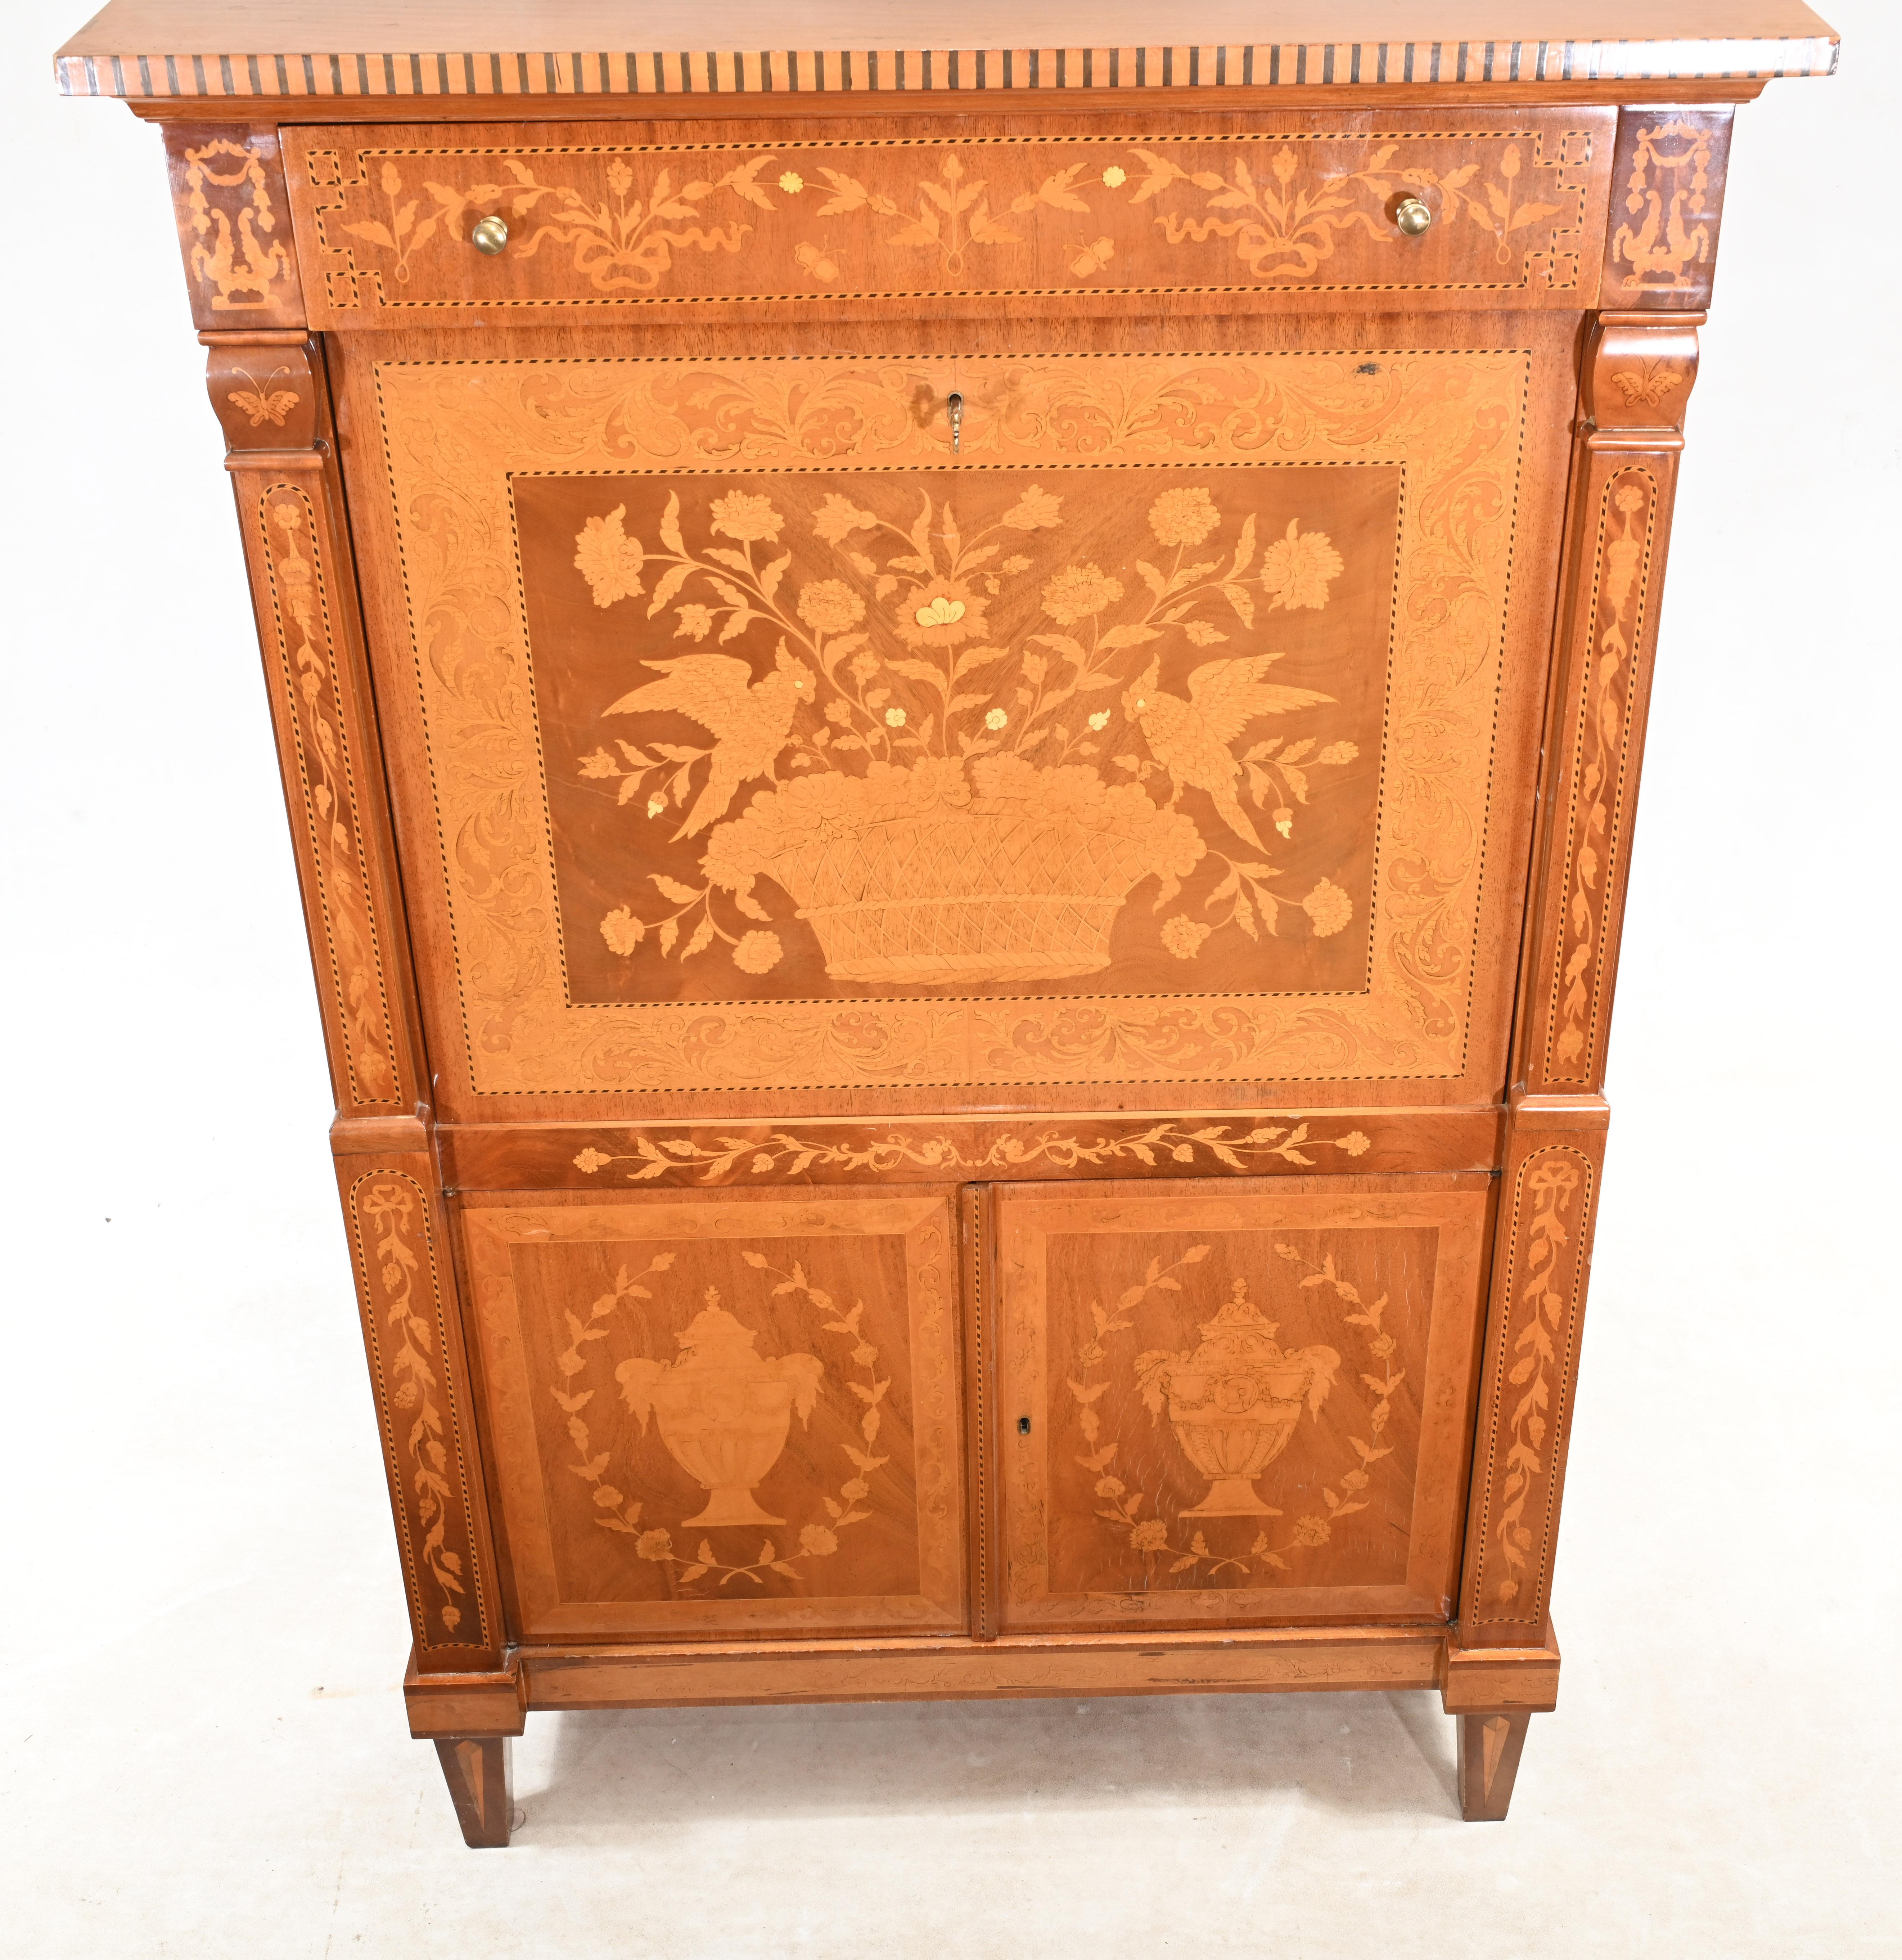 Large size Dutch marquetry escritoire profusely inlaid urns, flowers and birds 
Beautiful piece we date to circa 1890
Front opens out to reveal writing surface alongside drawers - 9 - and cubby holes
Some of our items are in storage so please